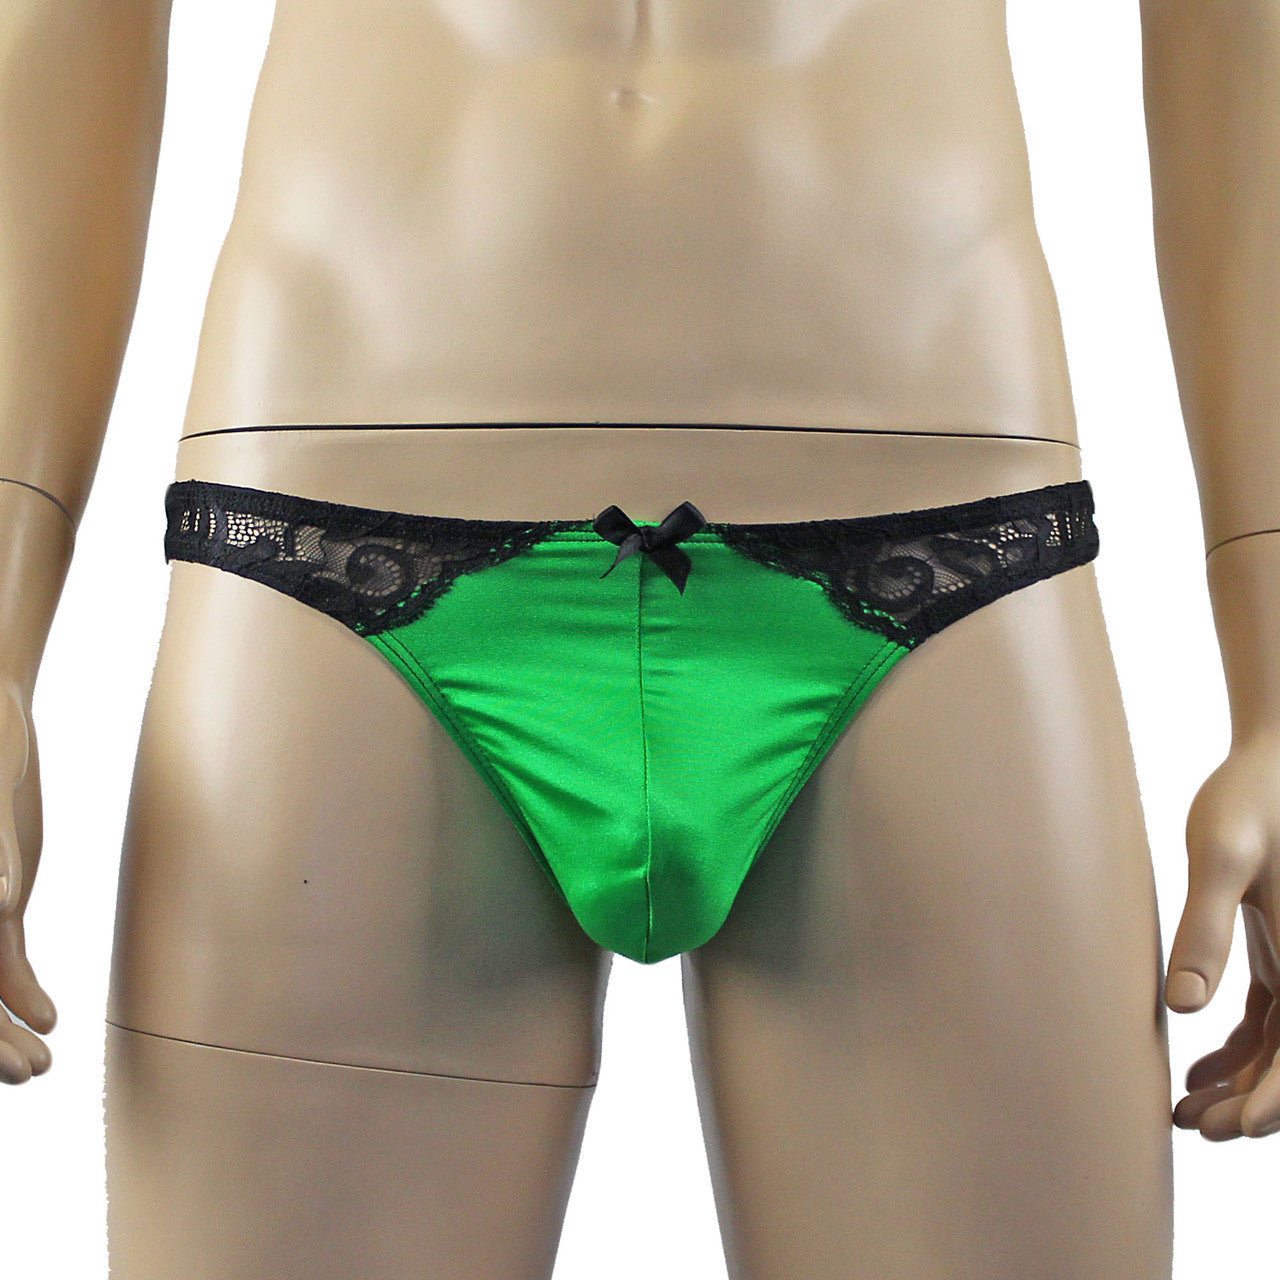 Mens Risque G string Thong Green and Black Lace